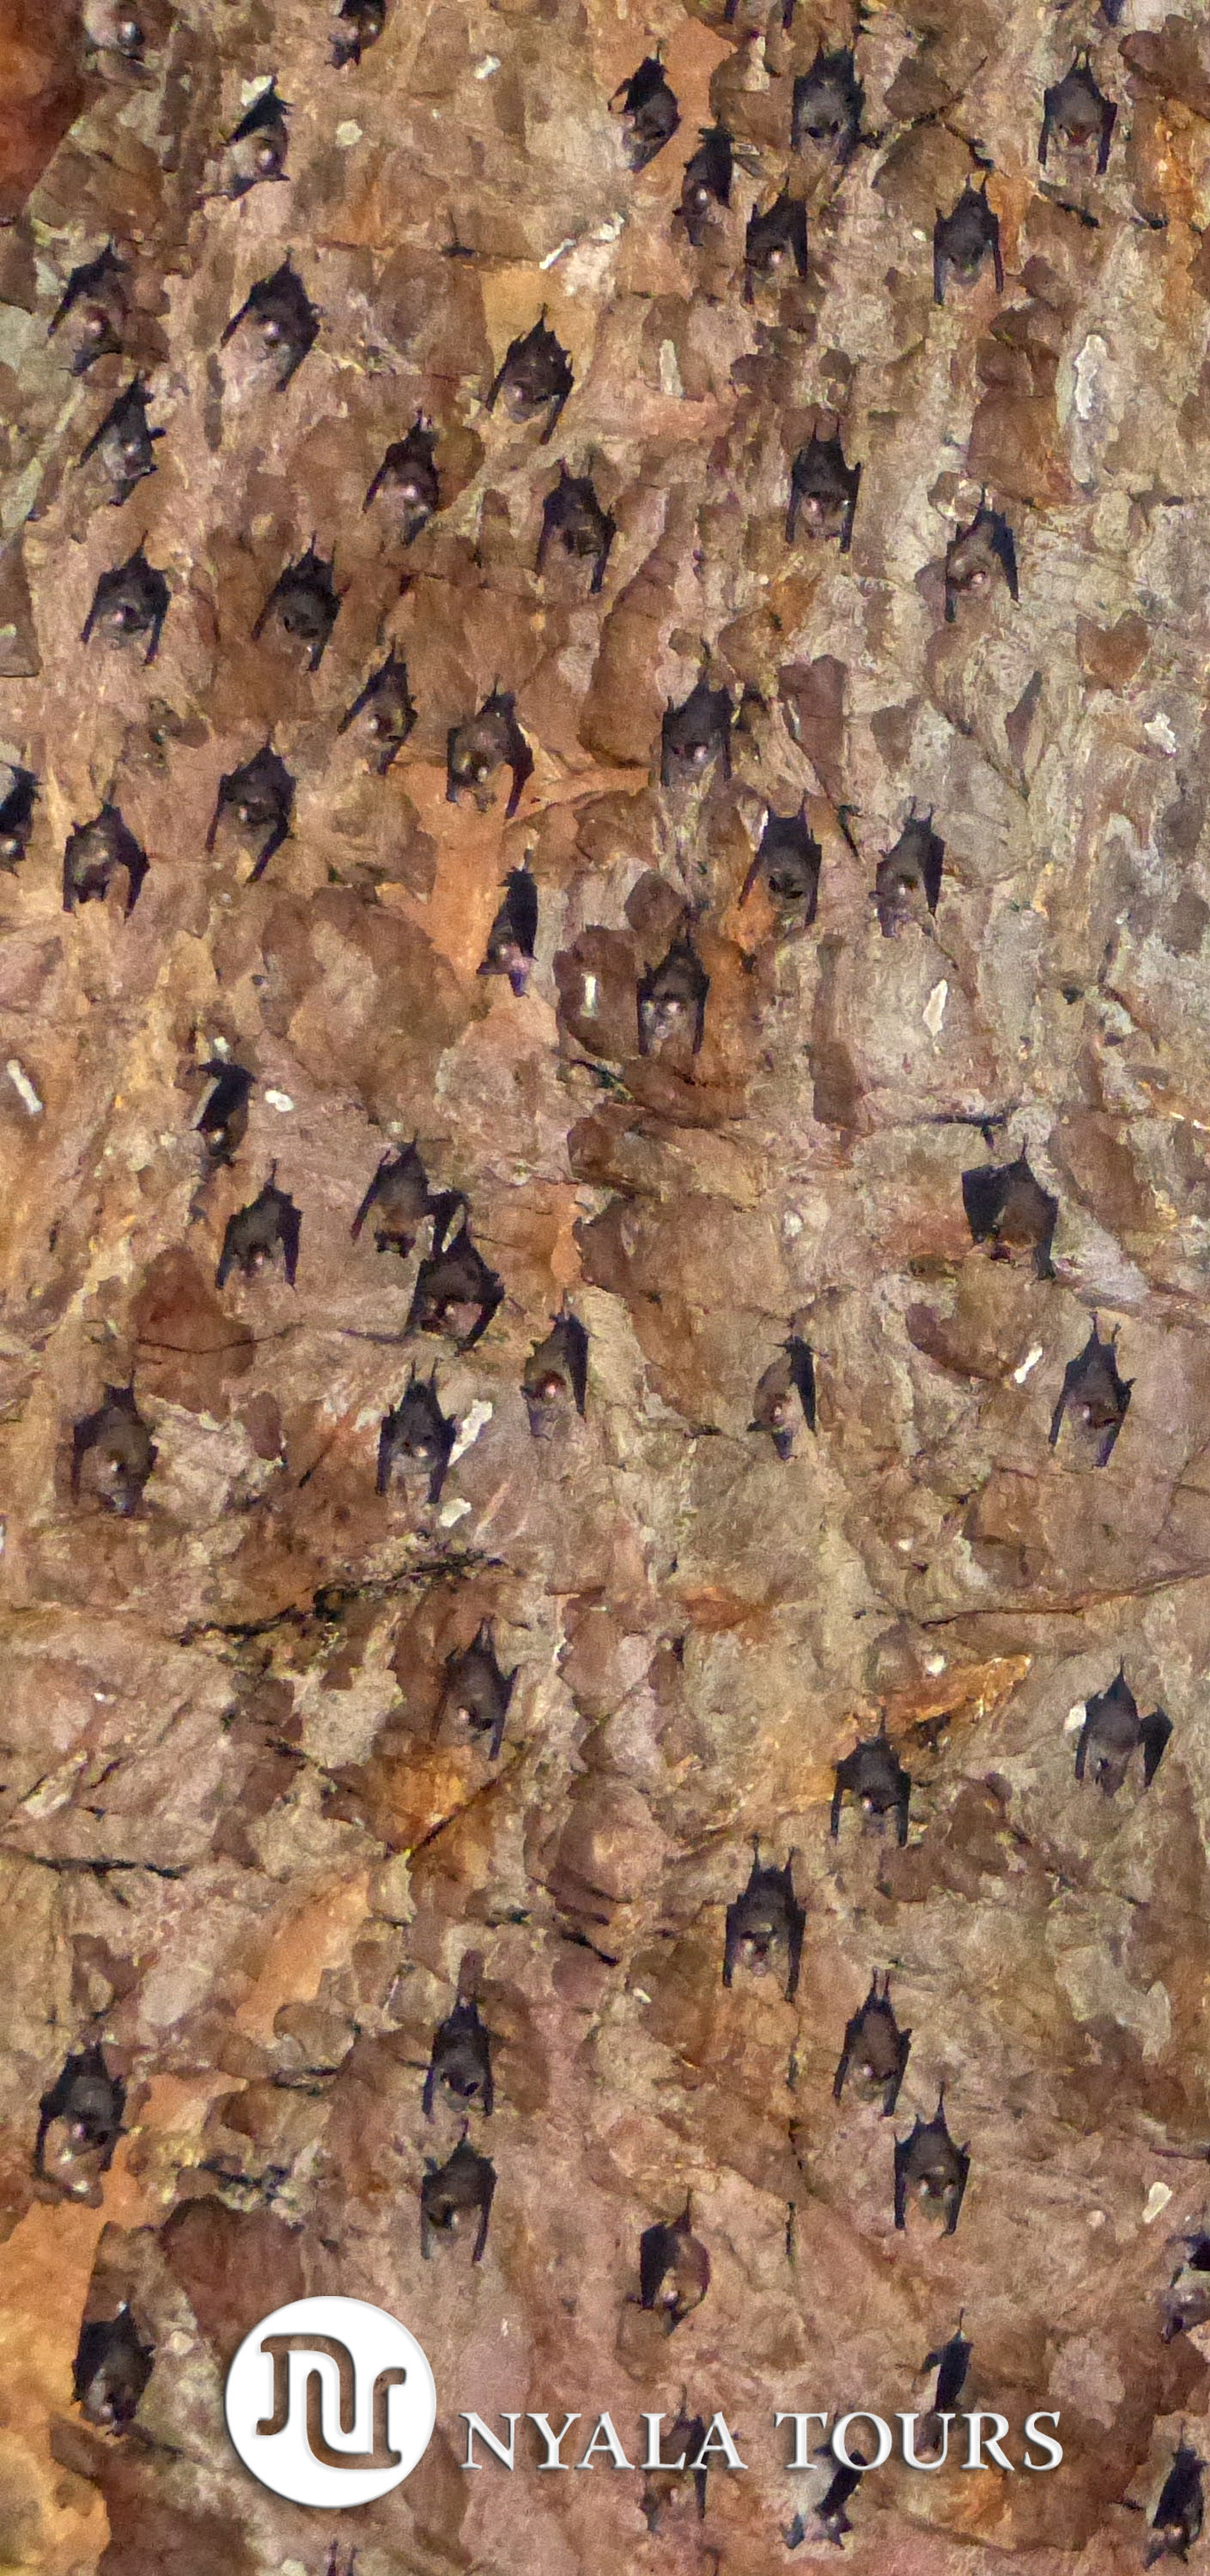 bats on ceiling